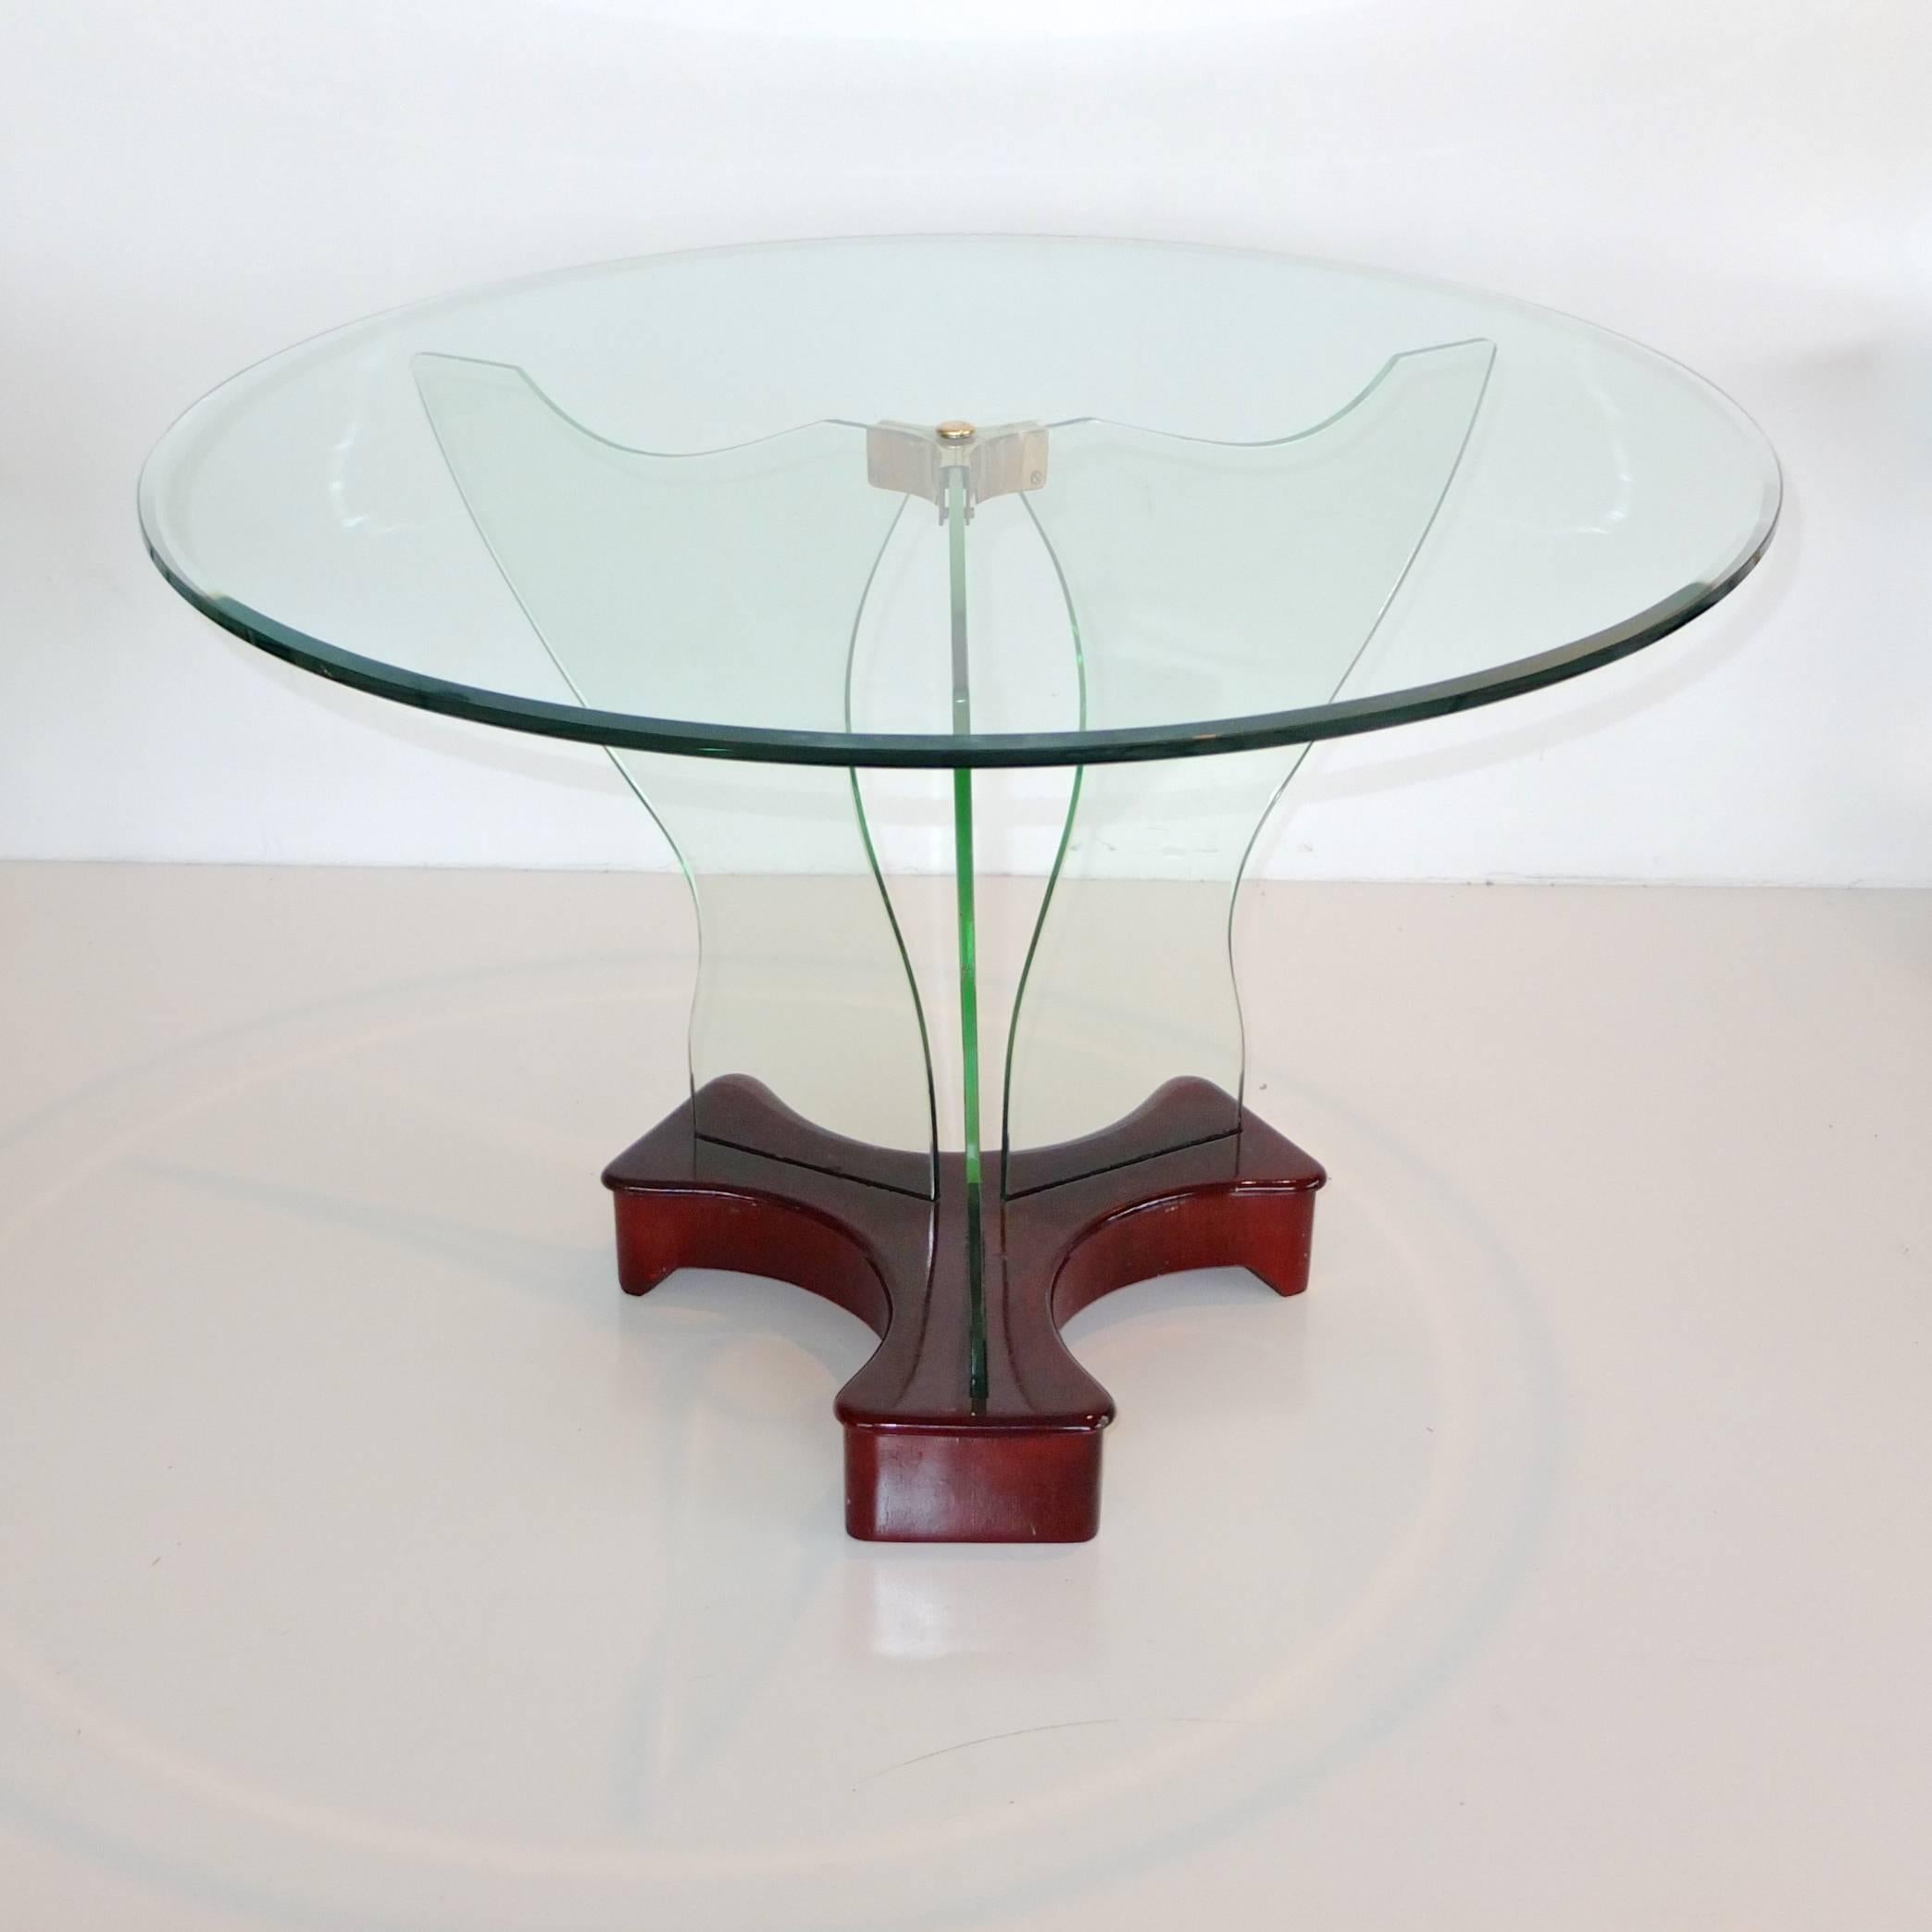 Luigi Brusotti 1930s Glass, Brass and Mahogany Cocktail Table For Sale 1